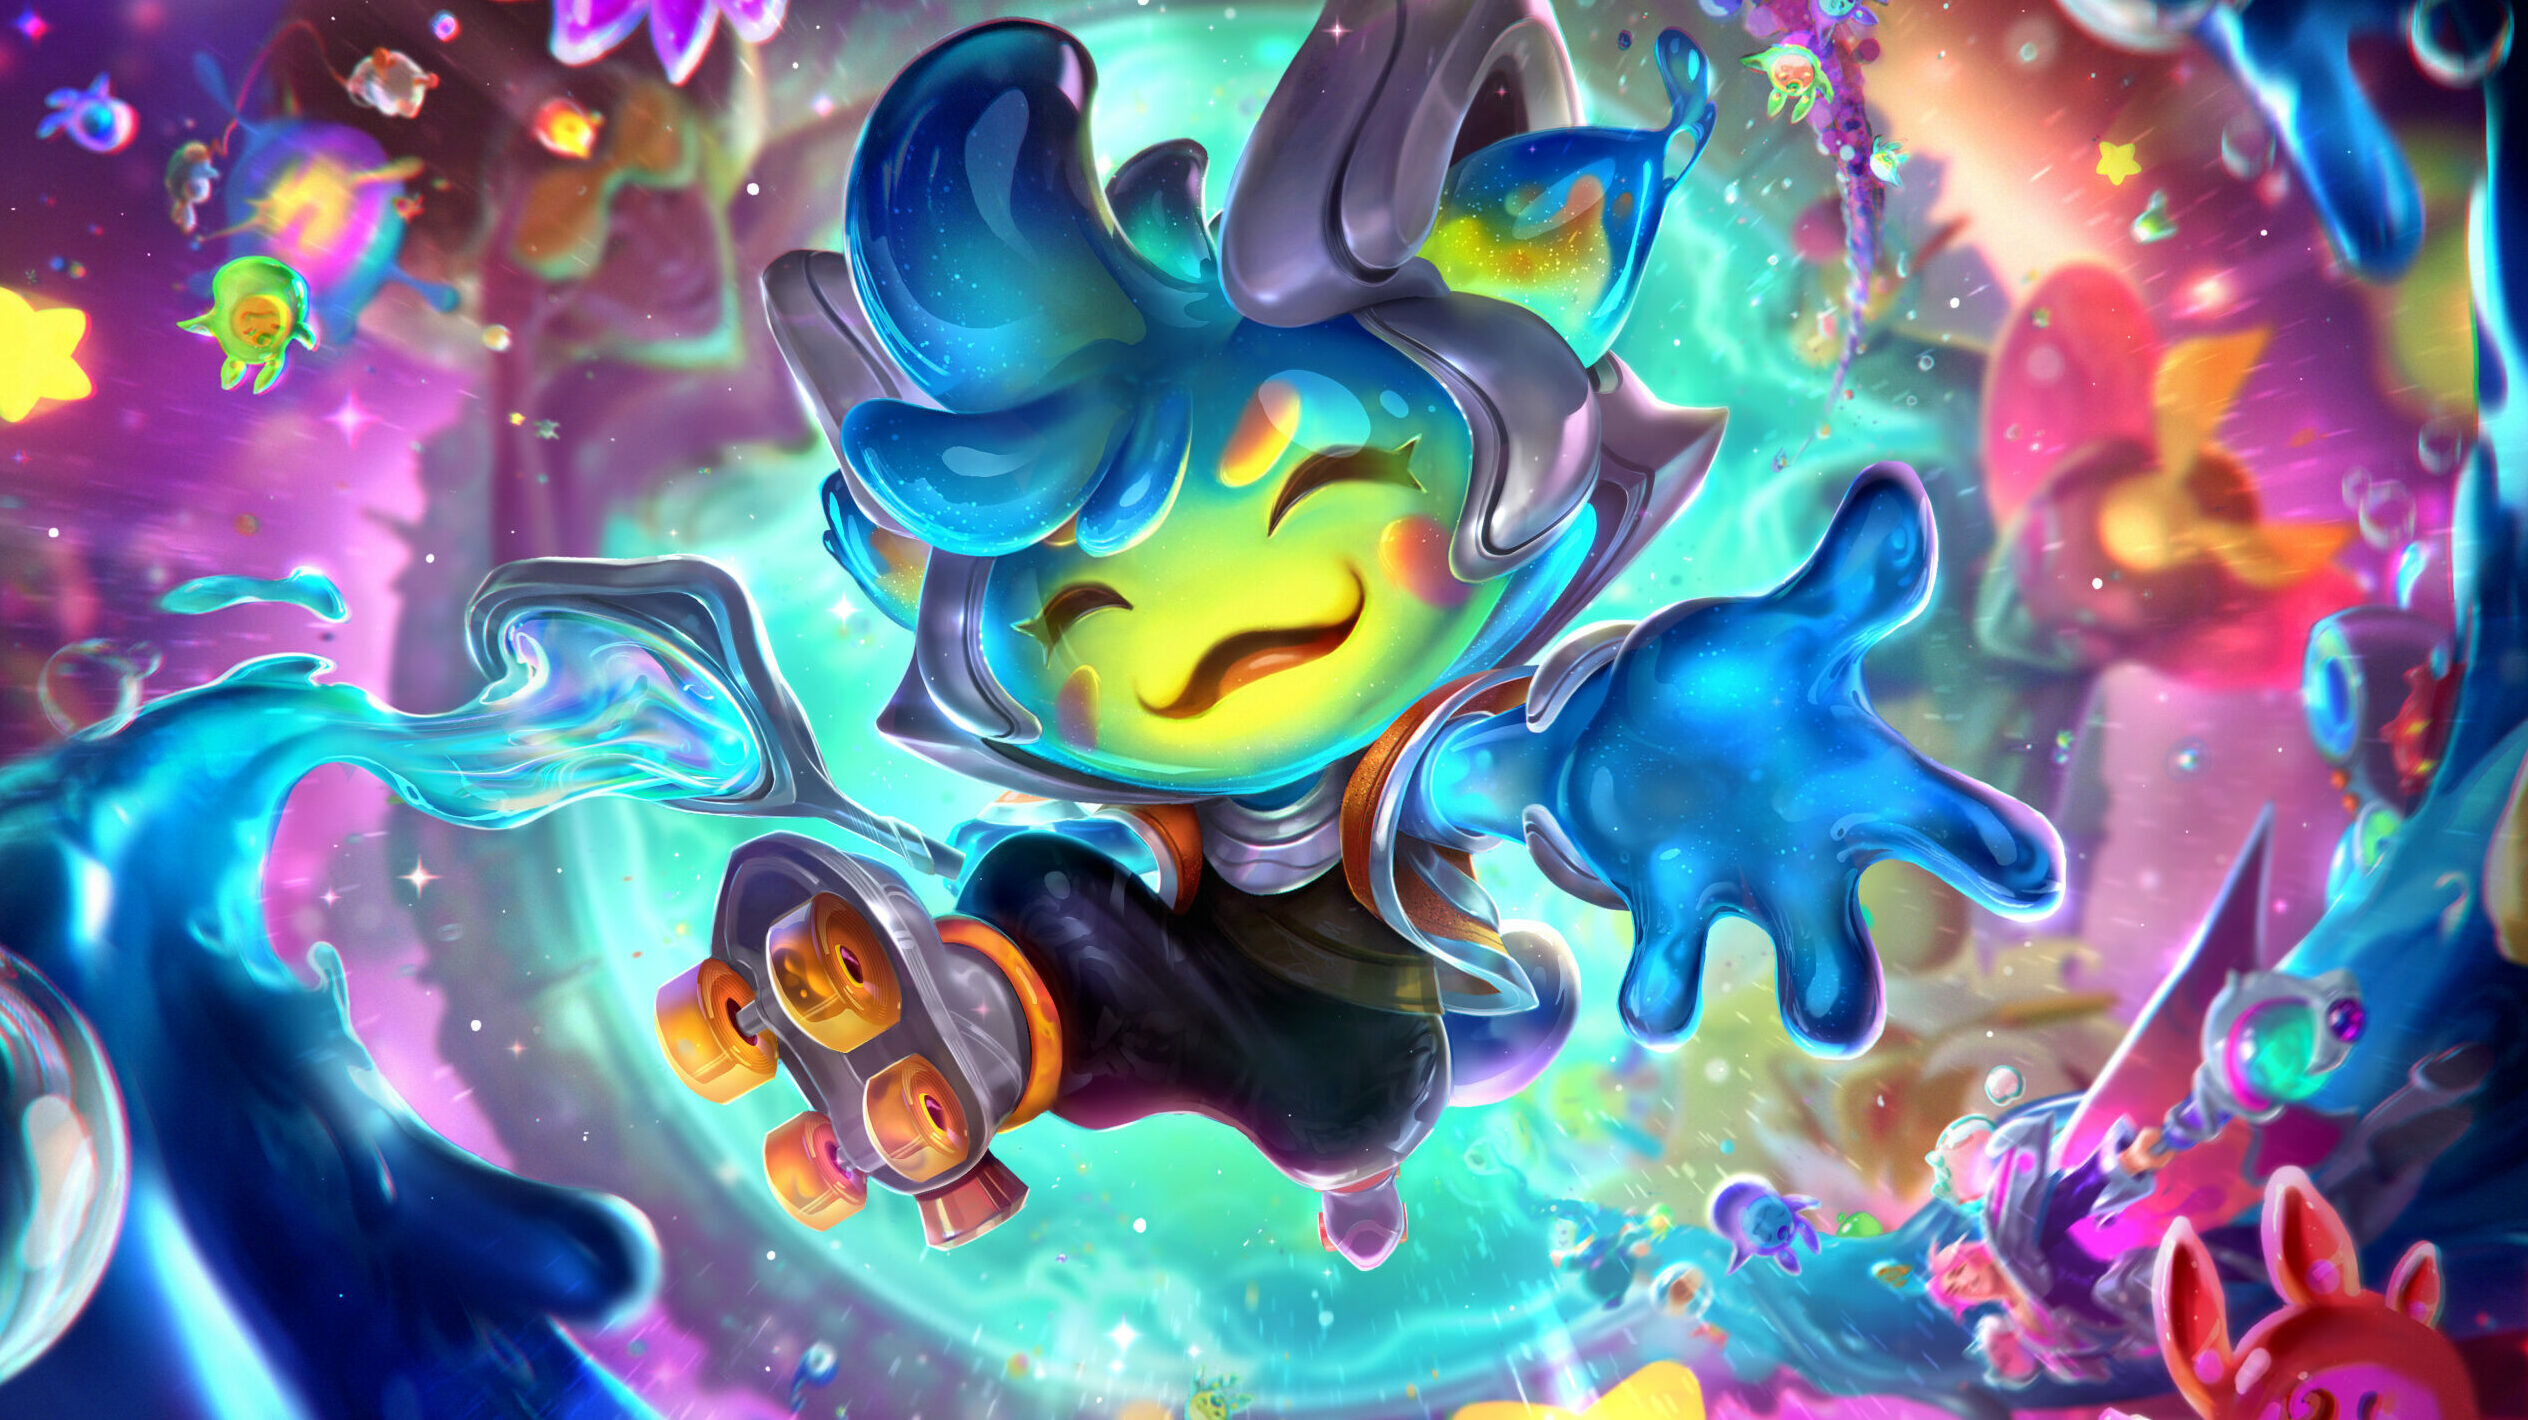 Featured image for “Get groovy with Teemo and others: New Space Groove skins underway”